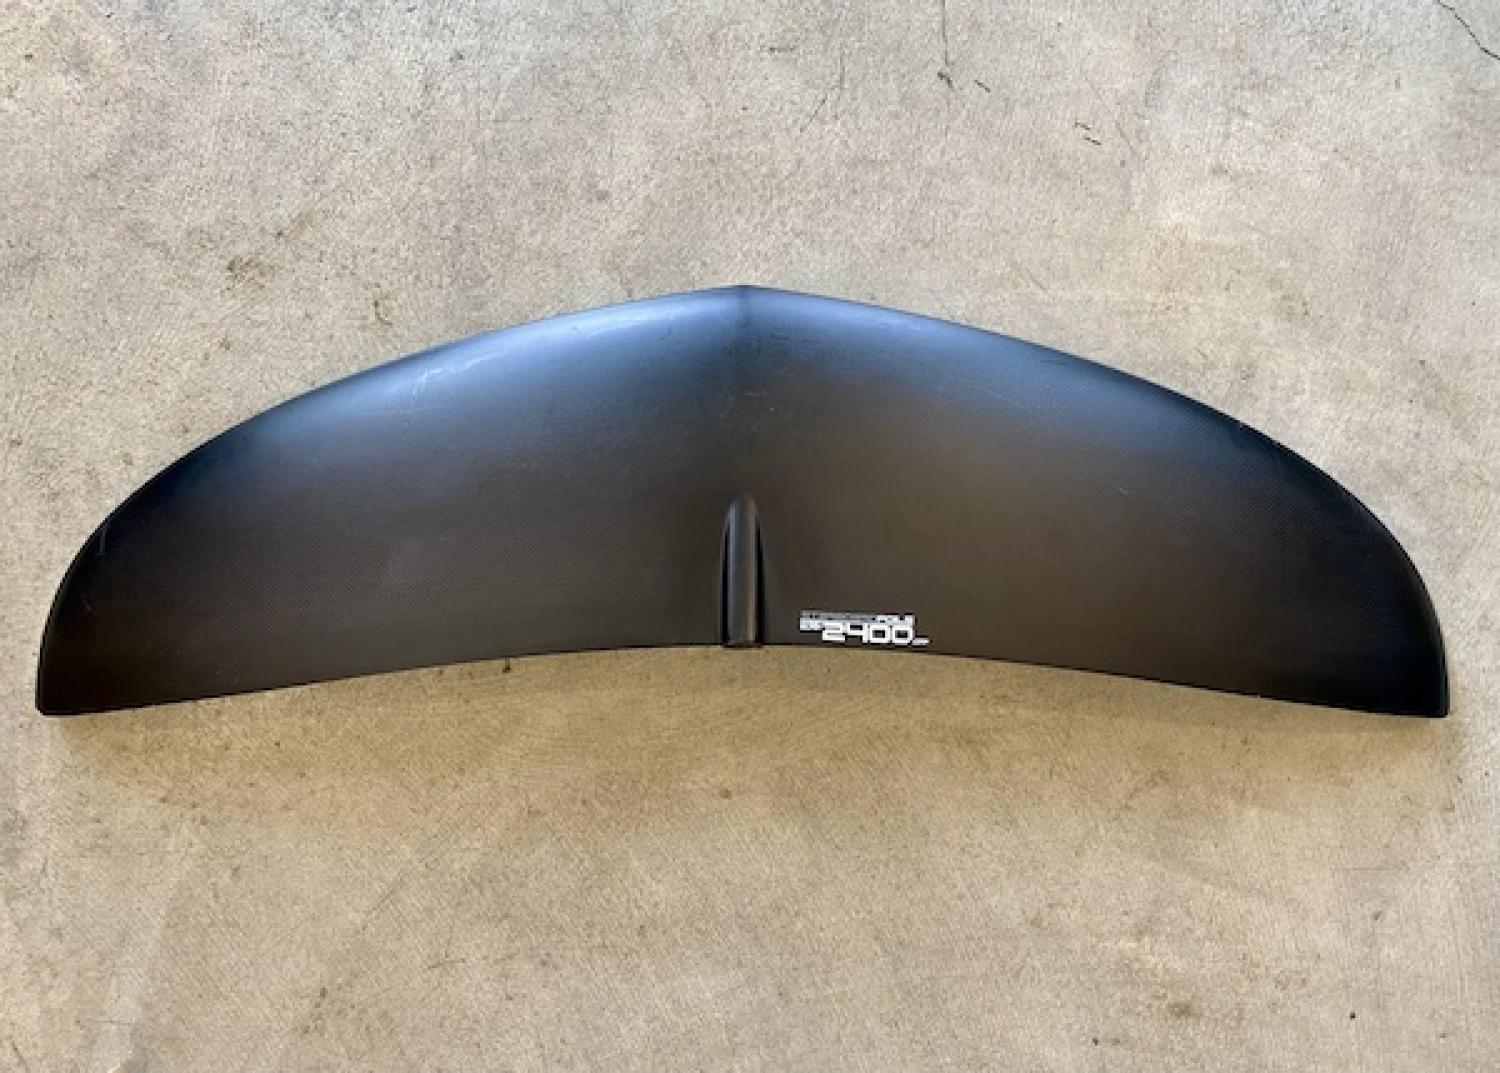 USED STARBOARD FRONT WING OCEAN SURF 2400 for Quick Lock HD